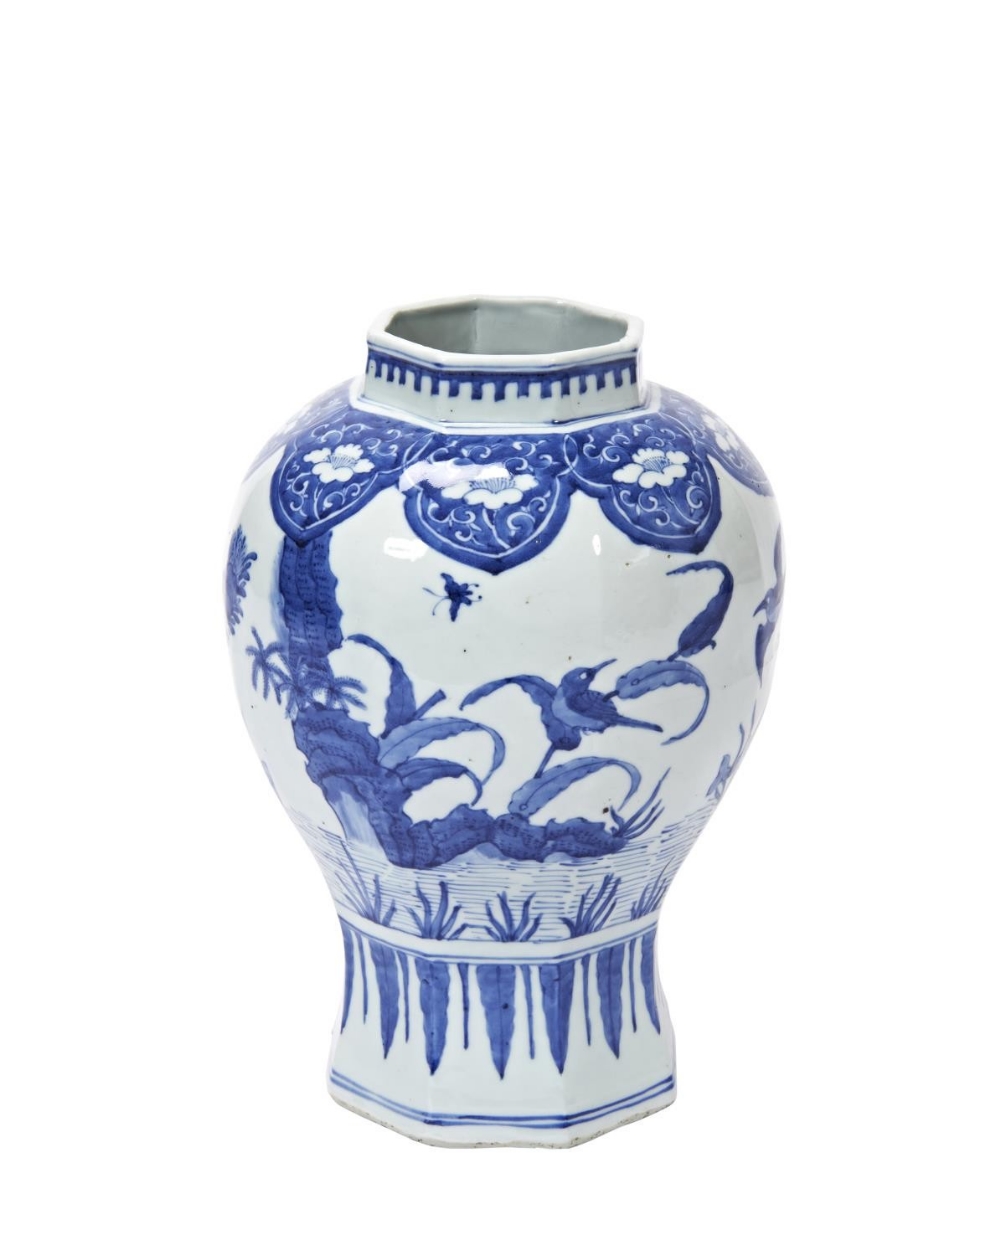 BLUE AND WHITE HEXAGONAL BALUSTER VASE  TRANSITIONAL PERIOD OR LATER the sides painted in tones of u